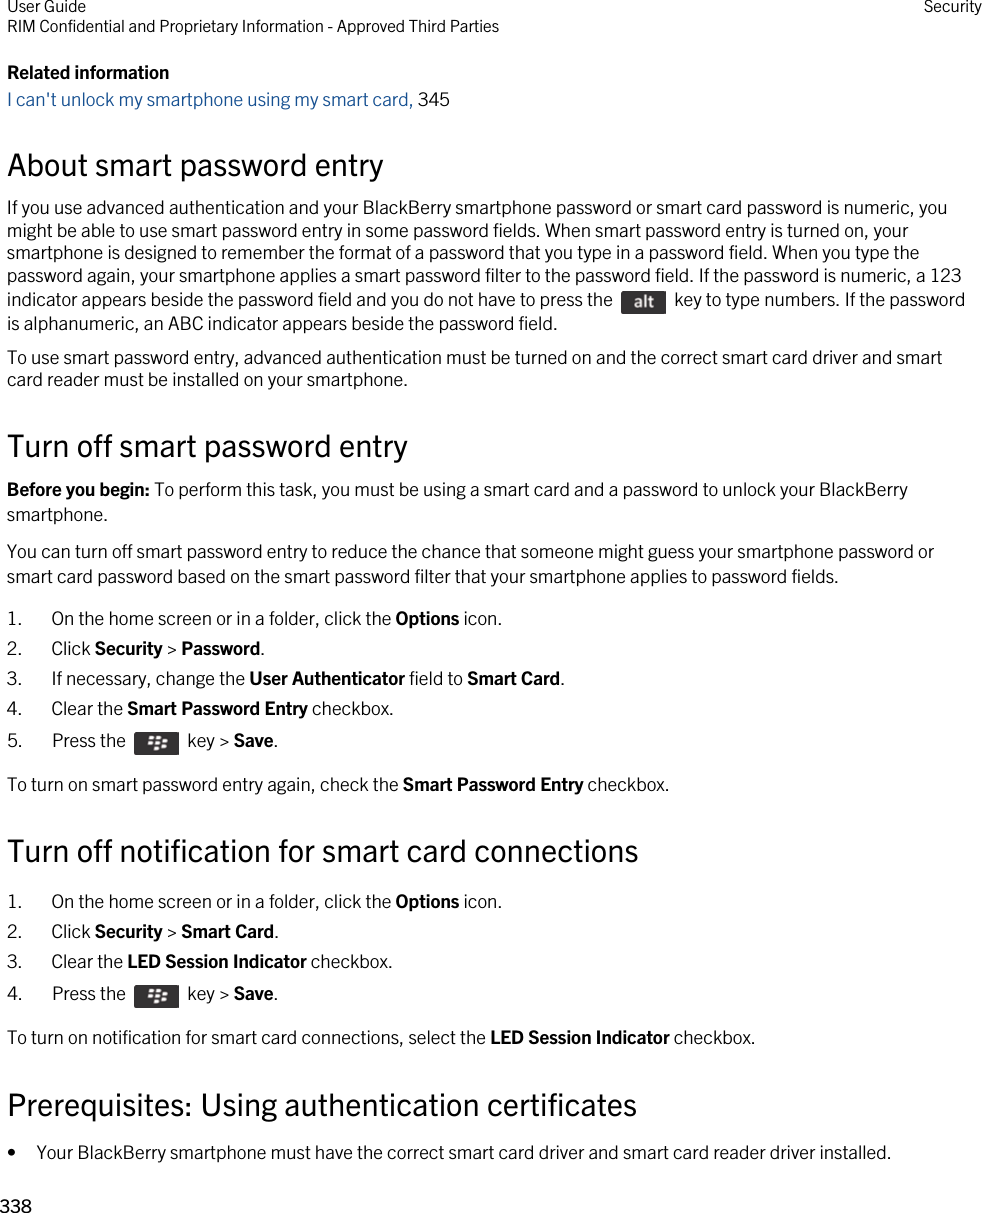 Related informationI can&apos;t unlock my smartphone using my smart card, 345About smart password entryIf you use advanced authentication and your BlackBerry smartphone password or smart card password is numeric, you might be able to use smart password entry in some password fields. When smart password entry is turned on, your smartphone is designed to remember the format of a password that you type in a password field. When you type the password again, your smartphone applies a smart password filter to the password field. If the password is numeric, a 123 indicator appears beside the password field and you do not have to press the    key to type numbers. If the password is alphanumeric, an ABC indicator appears beside the password field.To use smart password entry, advanced authentication must be turned on and the correct smart card driver and smart card reader must be installed on your smartphone.Turn off smart password entryBefore you begin: To perform this task, you must be using a smart card and a password to unlock your BlackBerry smartphone. You can turn off smart password entry to reduce the chance that someone might guess your smartphone password or smart card password based on the smart password filter that your smartphone applies to password fields.1. On the home screen or in a folder, click the Options icon.2. Click Security &gt; Password.3. If necessary, change the User Authenticator field to Smart Card.4. Clear the Smart Password Entry checkbox.5.  Press the    key &gt; Save. To turn on smart password entry again, check the Smart Password Entry checkbox.Turn off notification for smart card connections1. On the home screen or in a folder, click the Options icon.2. Click Security &gt; Smart Card.3. Clear the LED Session Indicator checkbox.4.  Press the    key &gt; Save. To turn on notification for smart card connections, select the LED Session Indicator checkbox.Prerequisites: Using authentication certificates• Your BlackBerry smartphone must have the correct smart card driver and smart card reader driver installed.User GuideRIM Confidential and Proprietary Information - Approved Third Parties Security338 